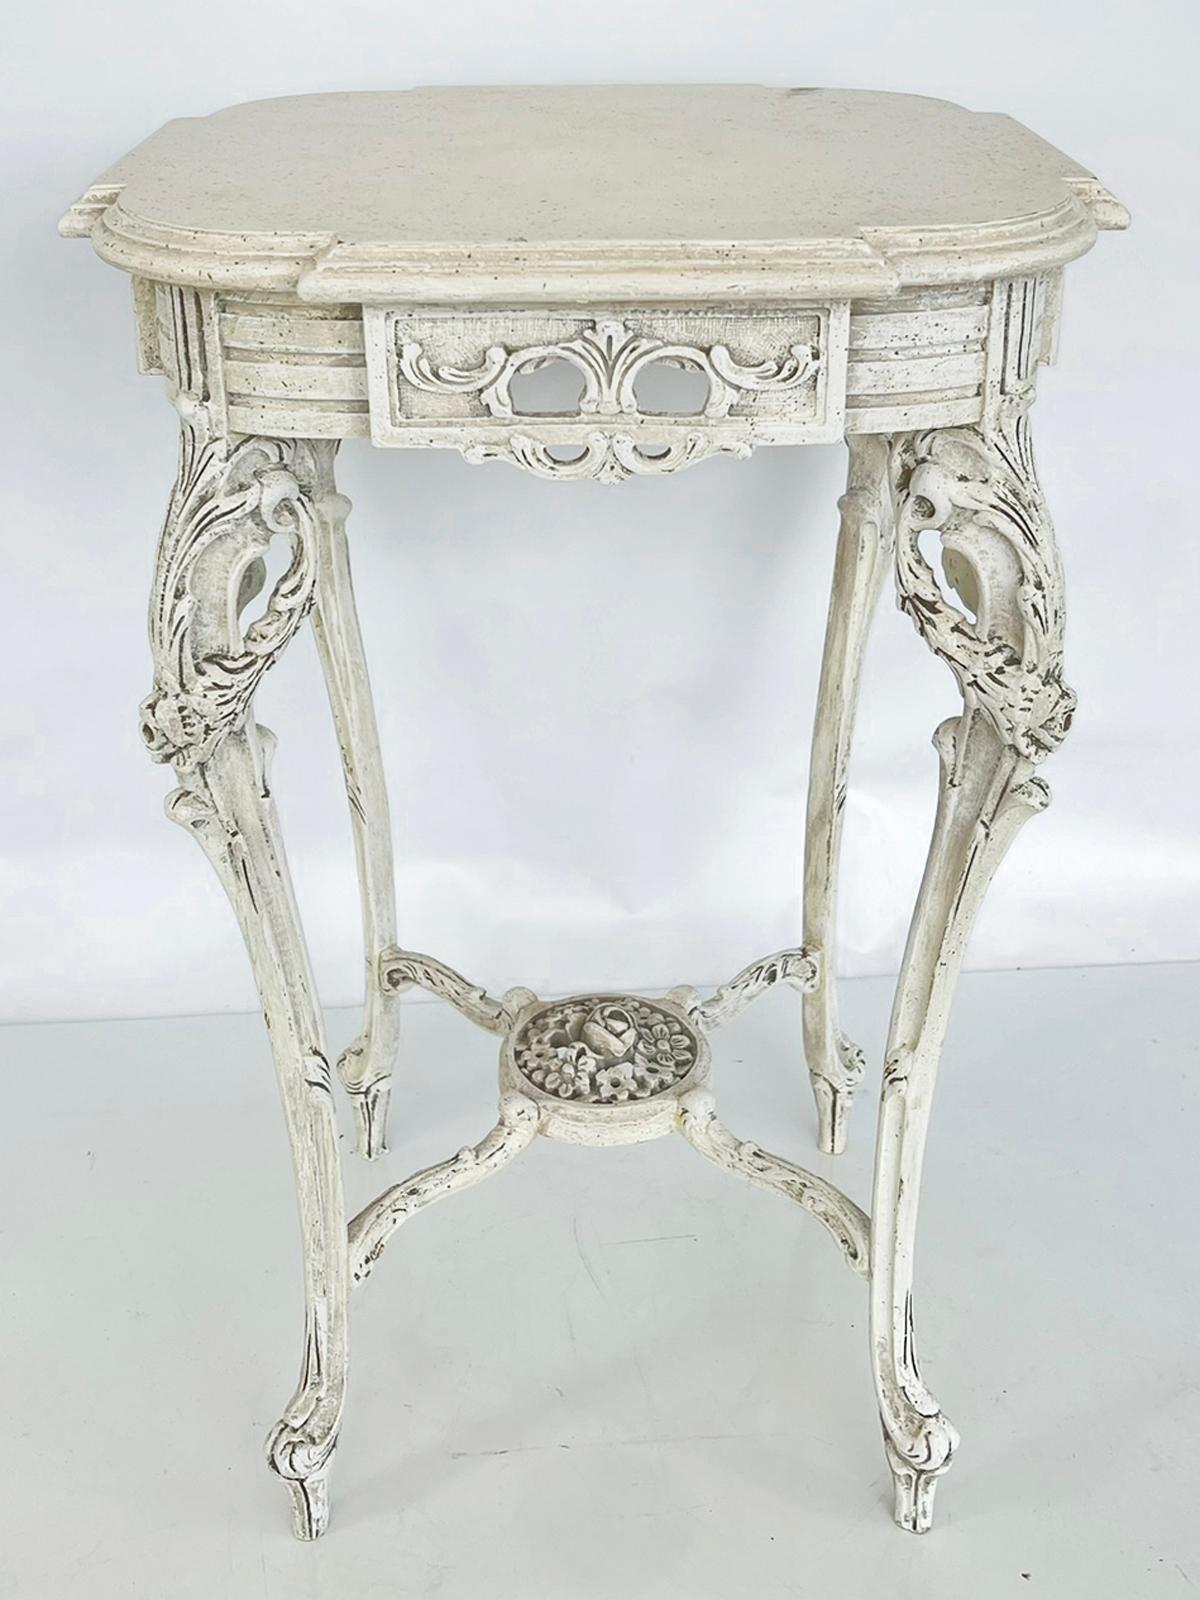 Candlestand occasional table, having an ivory-painted finish showing natural wear. Its square, molded table top with rounded corners, over a pierced, scrolling apron flanked by wide bands. The table is raised on four, acanthine-carved, cabriole